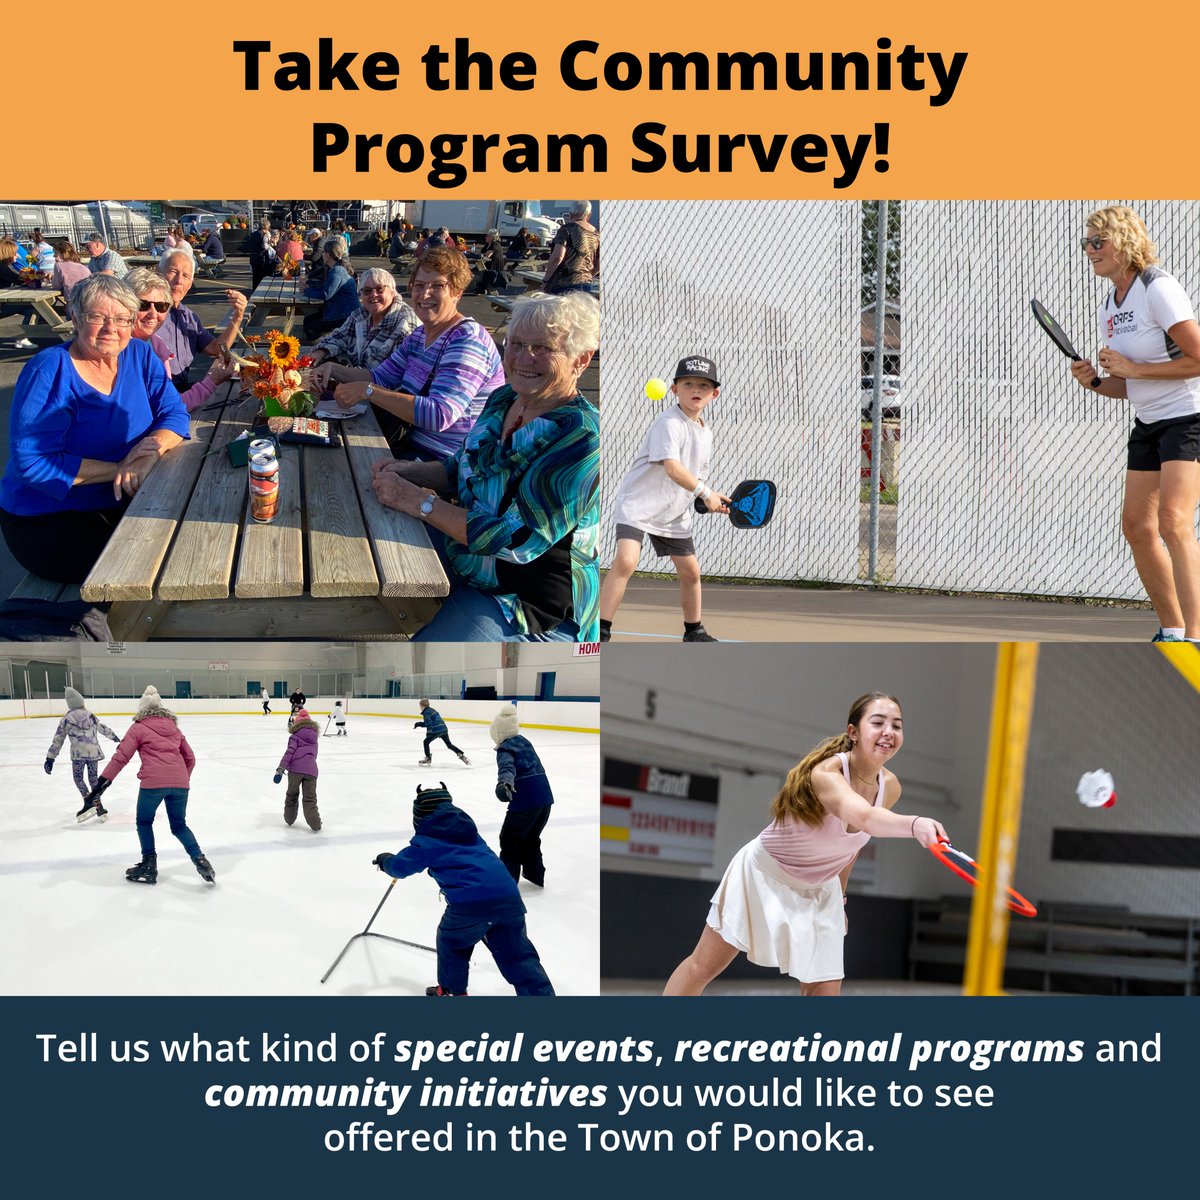 The Town of Ponoka invites you to share your thoughts and ideas on what kinds of on events, sports programs, and community initiatives you would like to see offered in the Town of Ponoka by completing the survey at LetsTalkPonoka.ca Learn more: tinyurl.com/59jdhxac